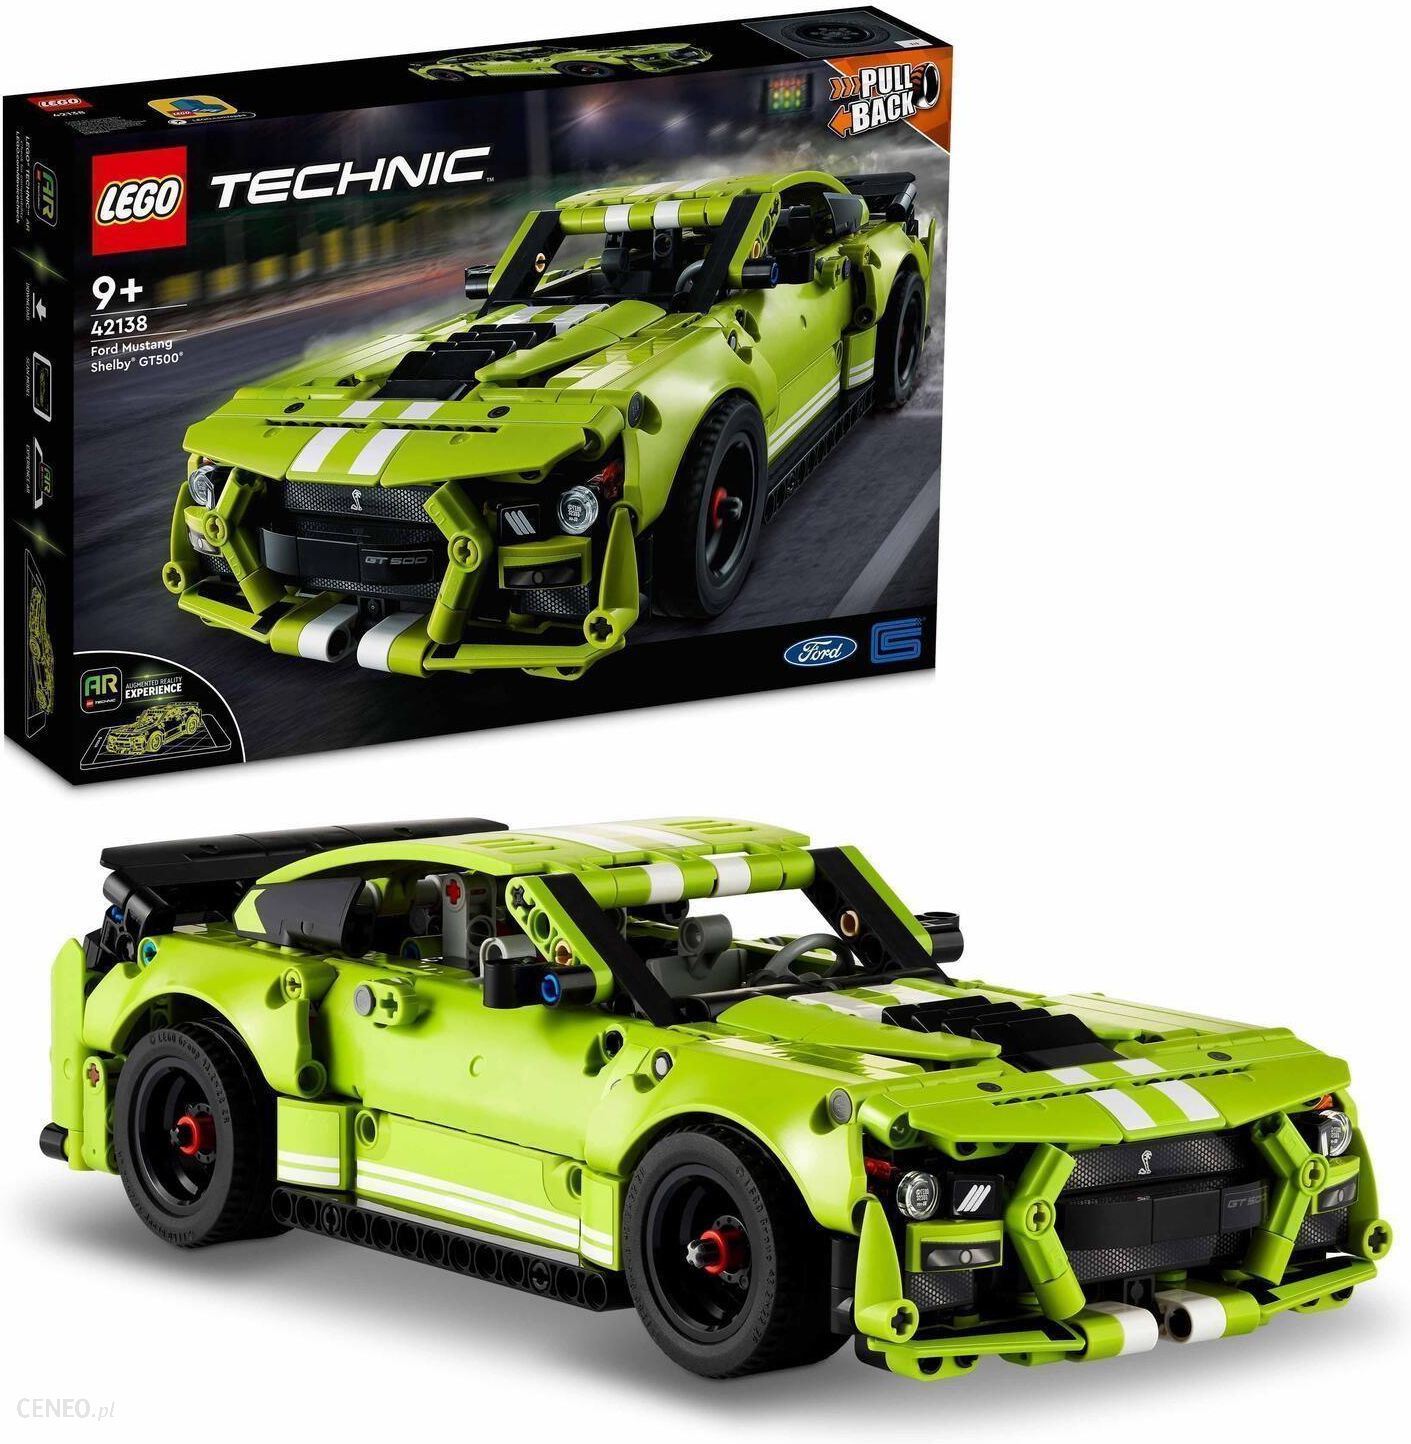 42138 LEGO® TECHNIC Ford Mustang Shelby GT500 - Conrad Electronic France